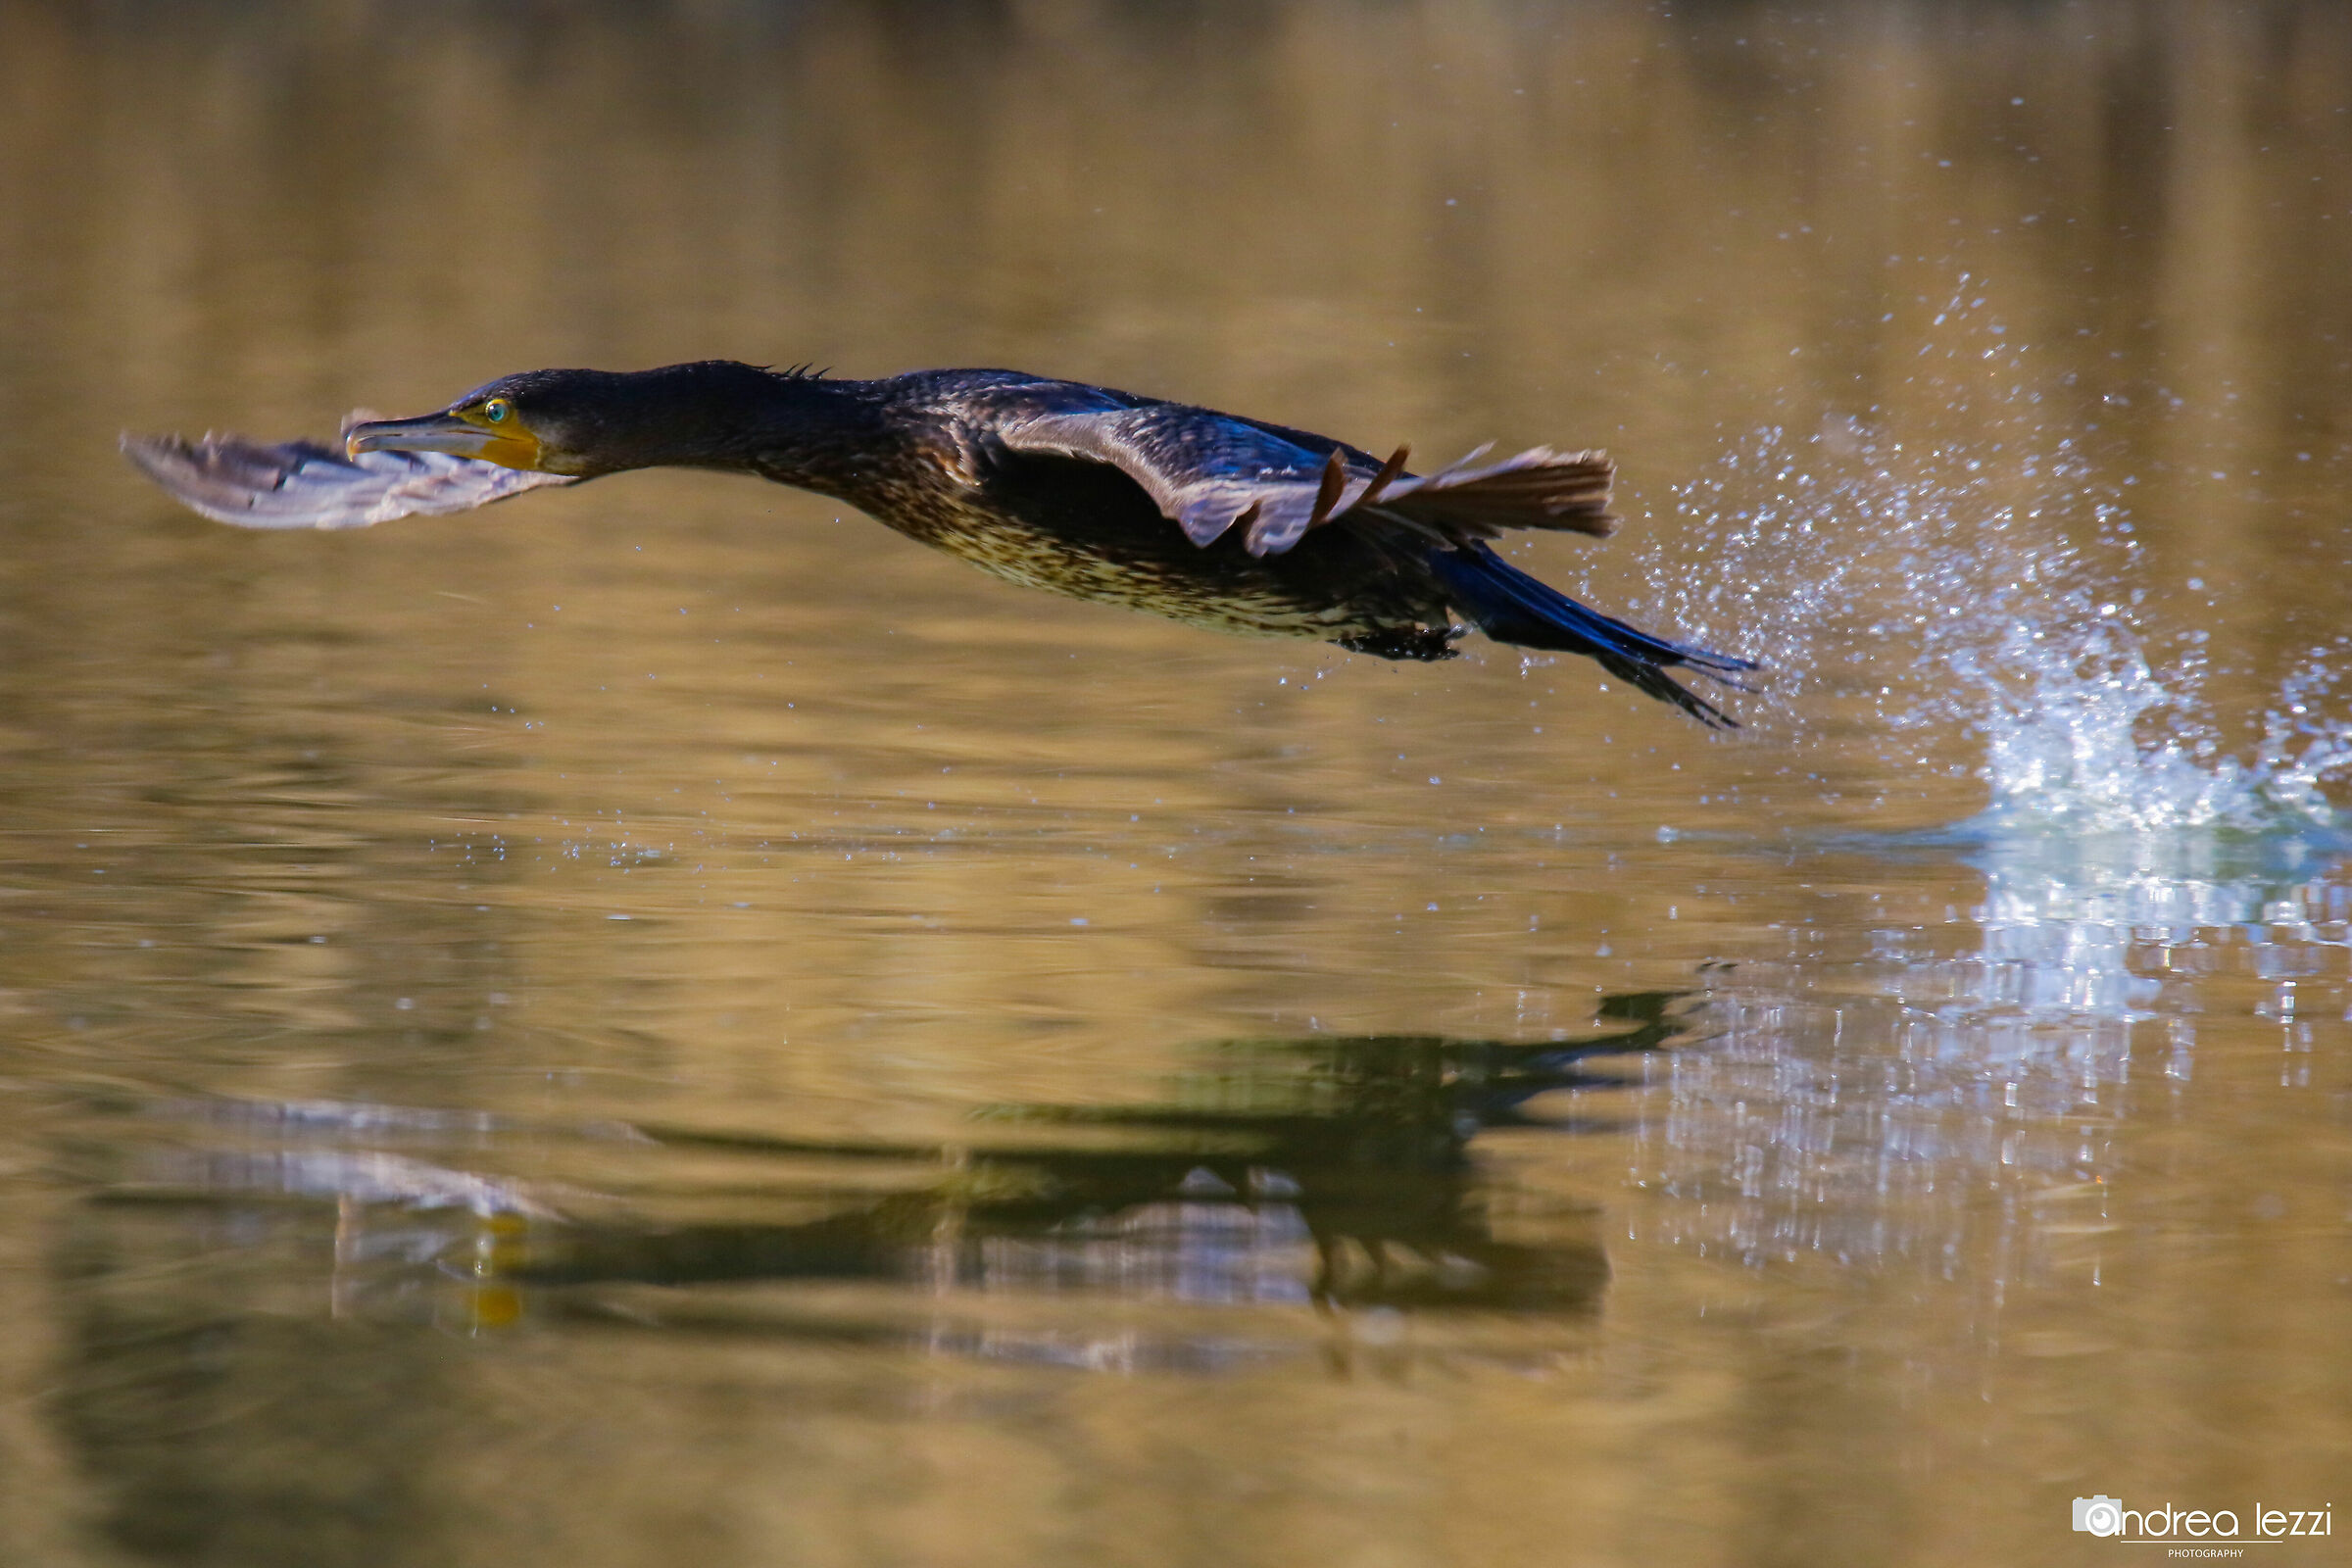 Water-haired cormorant...